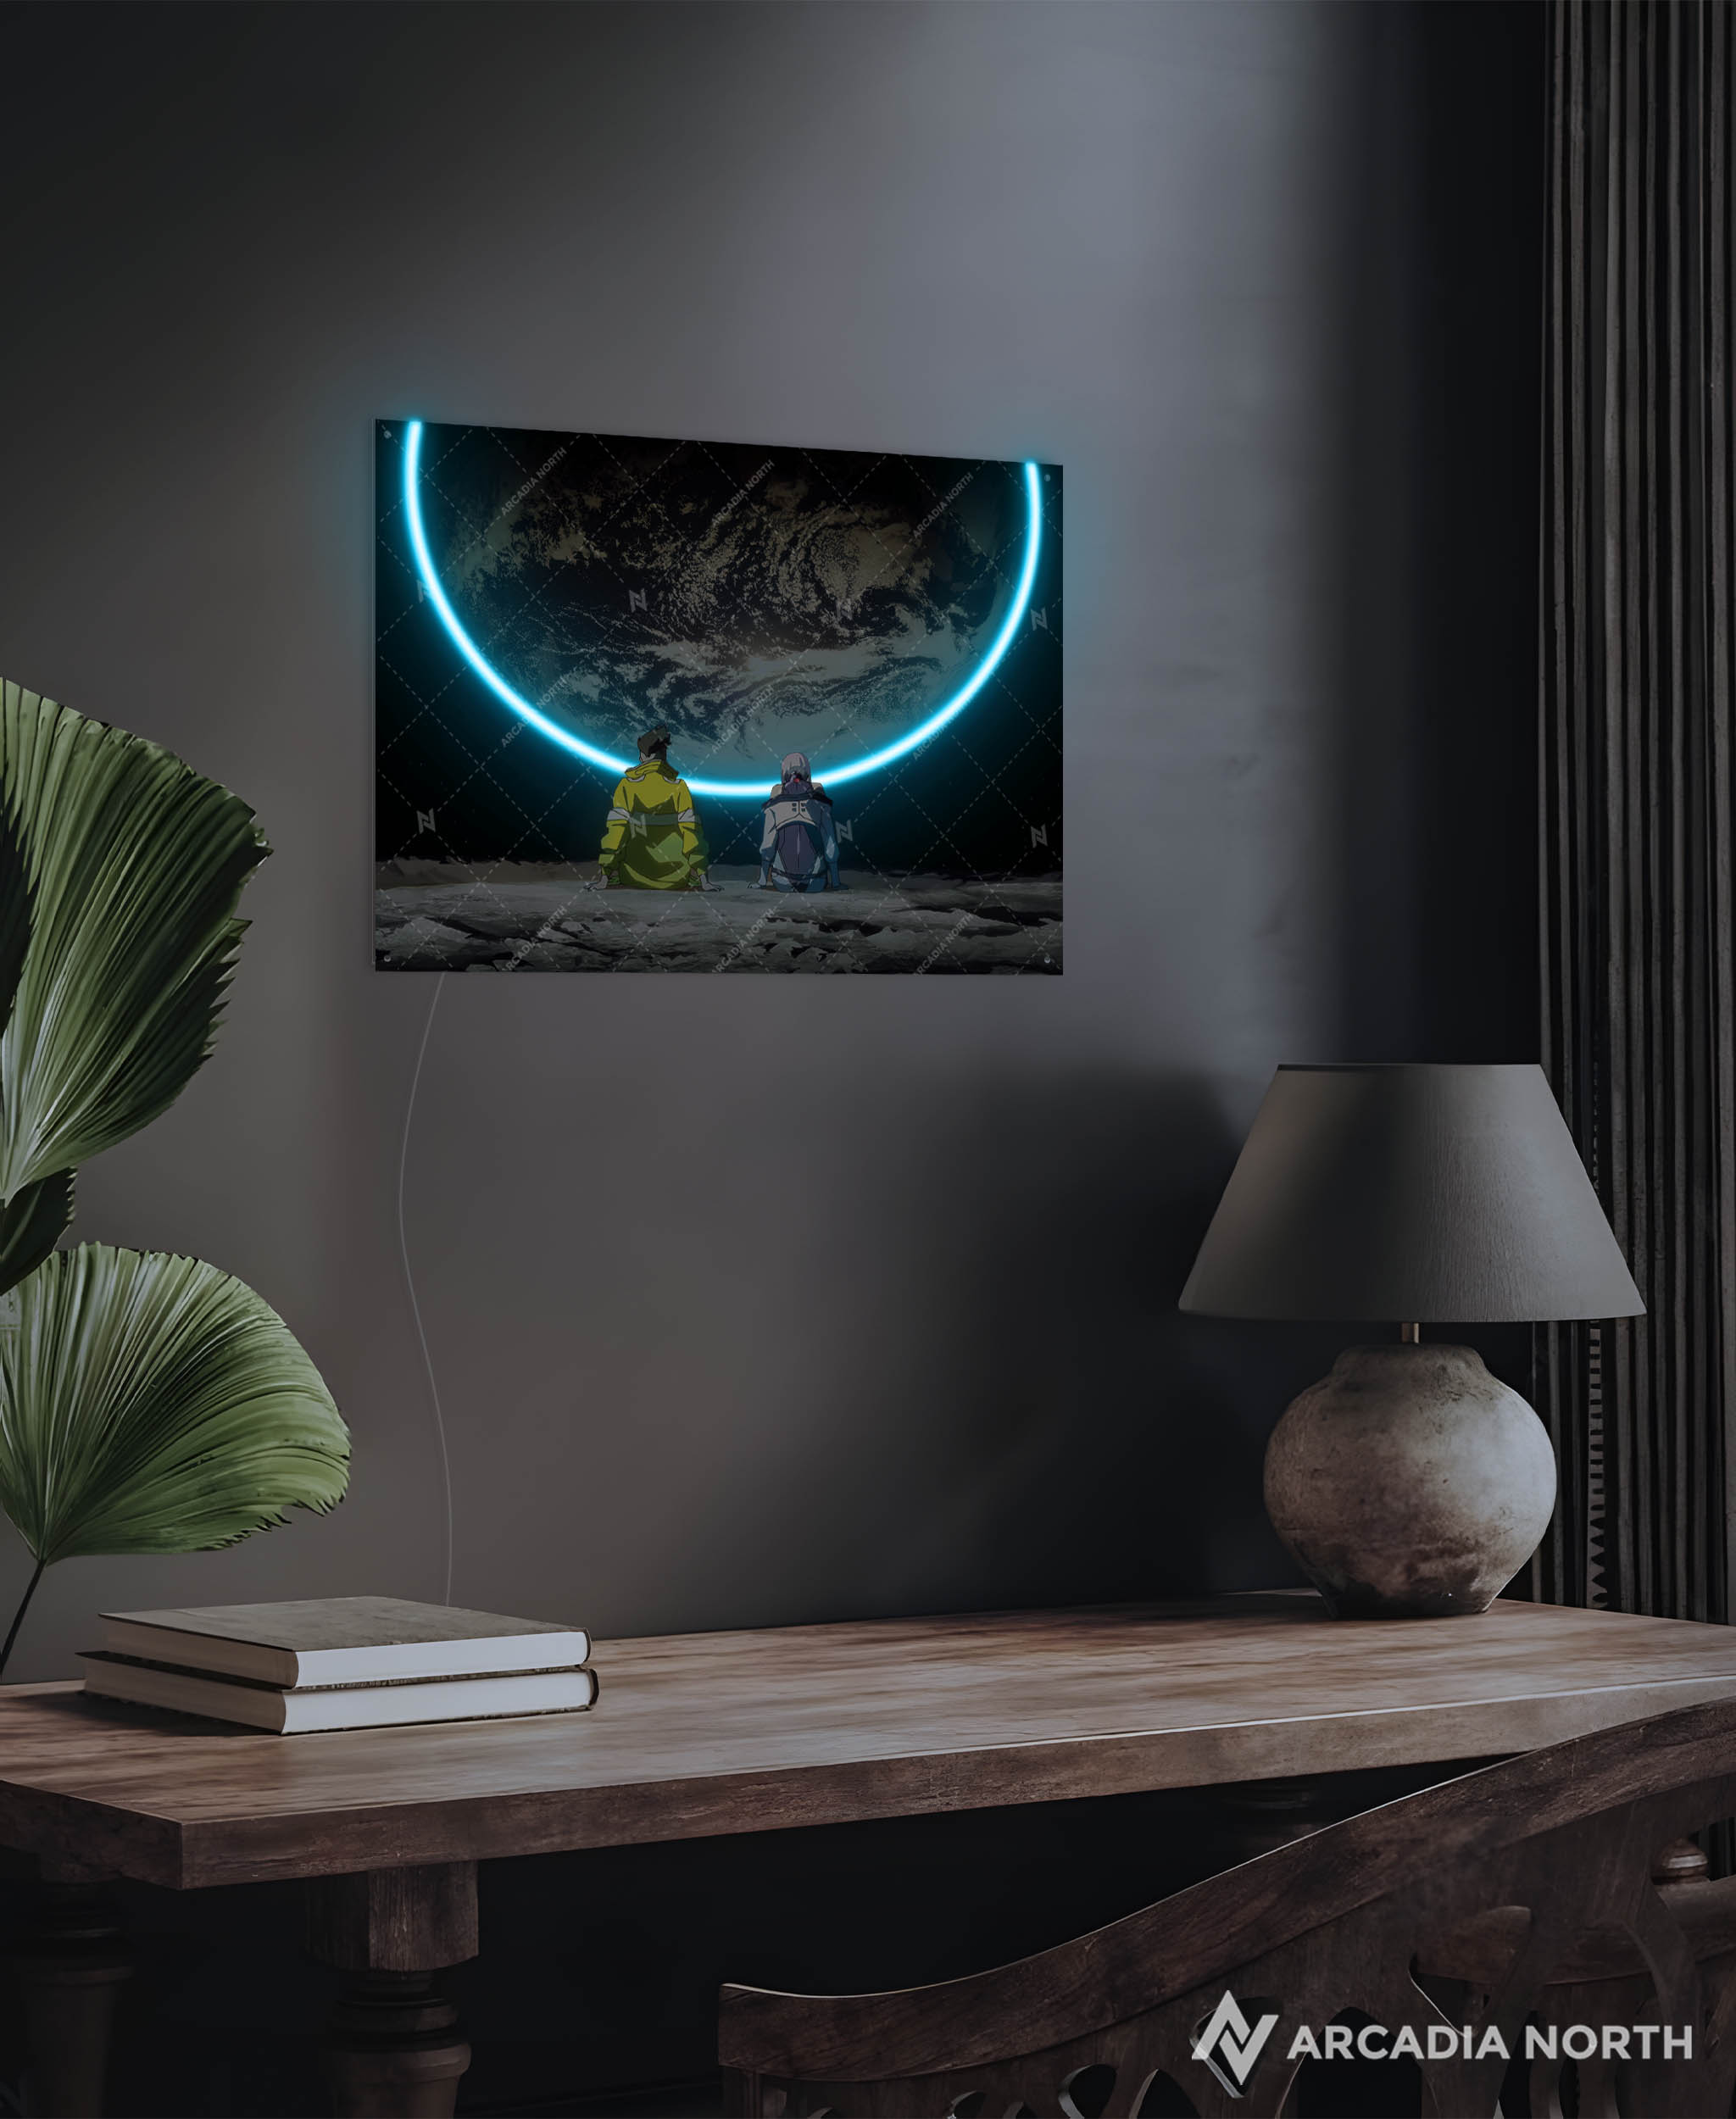 Arcadia North AURALIGHT - an LED Poster featuring the anime Cyberpunk: Edgerunners with David and Lucy moon scene. Illuminated by glowing neon LED lights. UV-printed on acrylic.